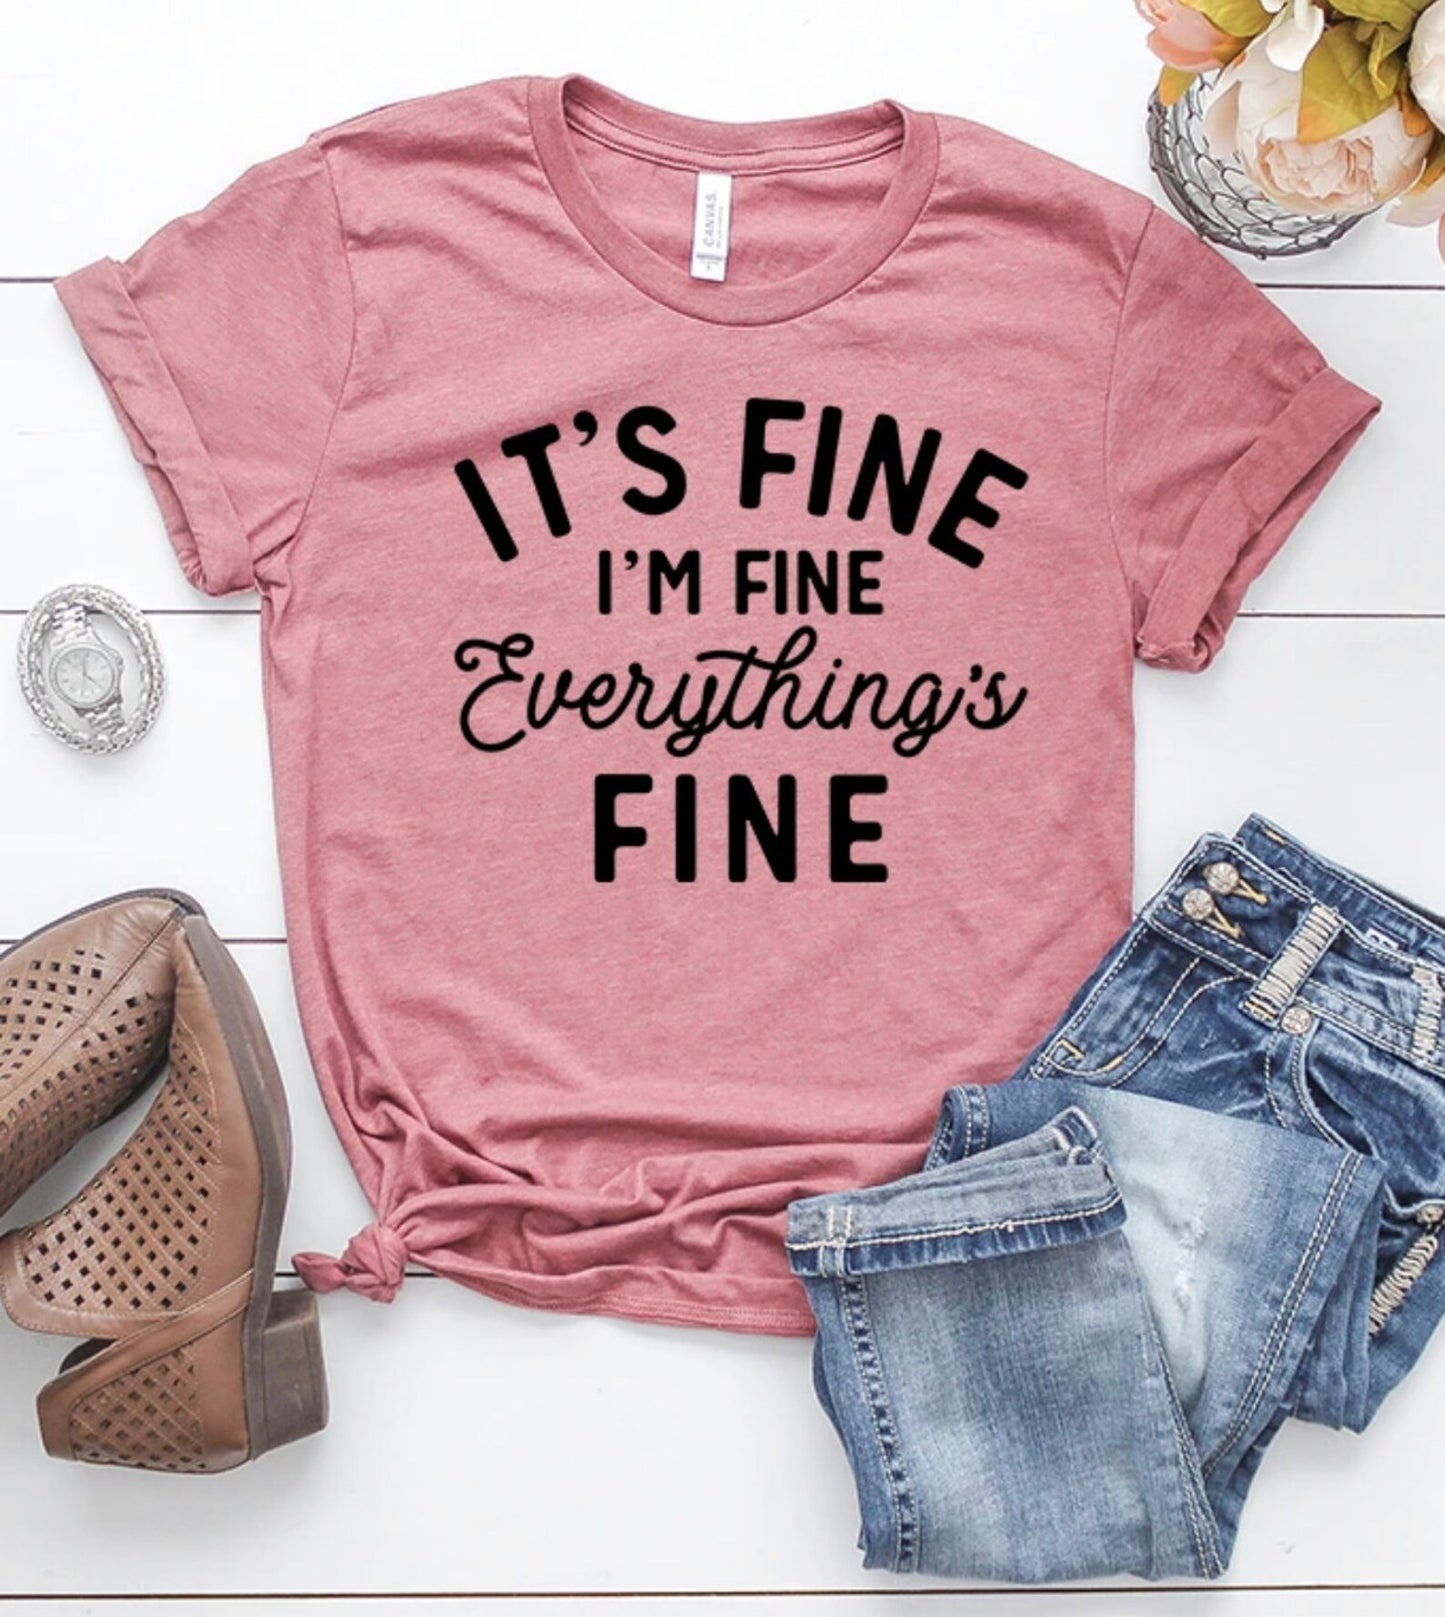 It's Fine, everything is fine shirt| Funny graphic tee